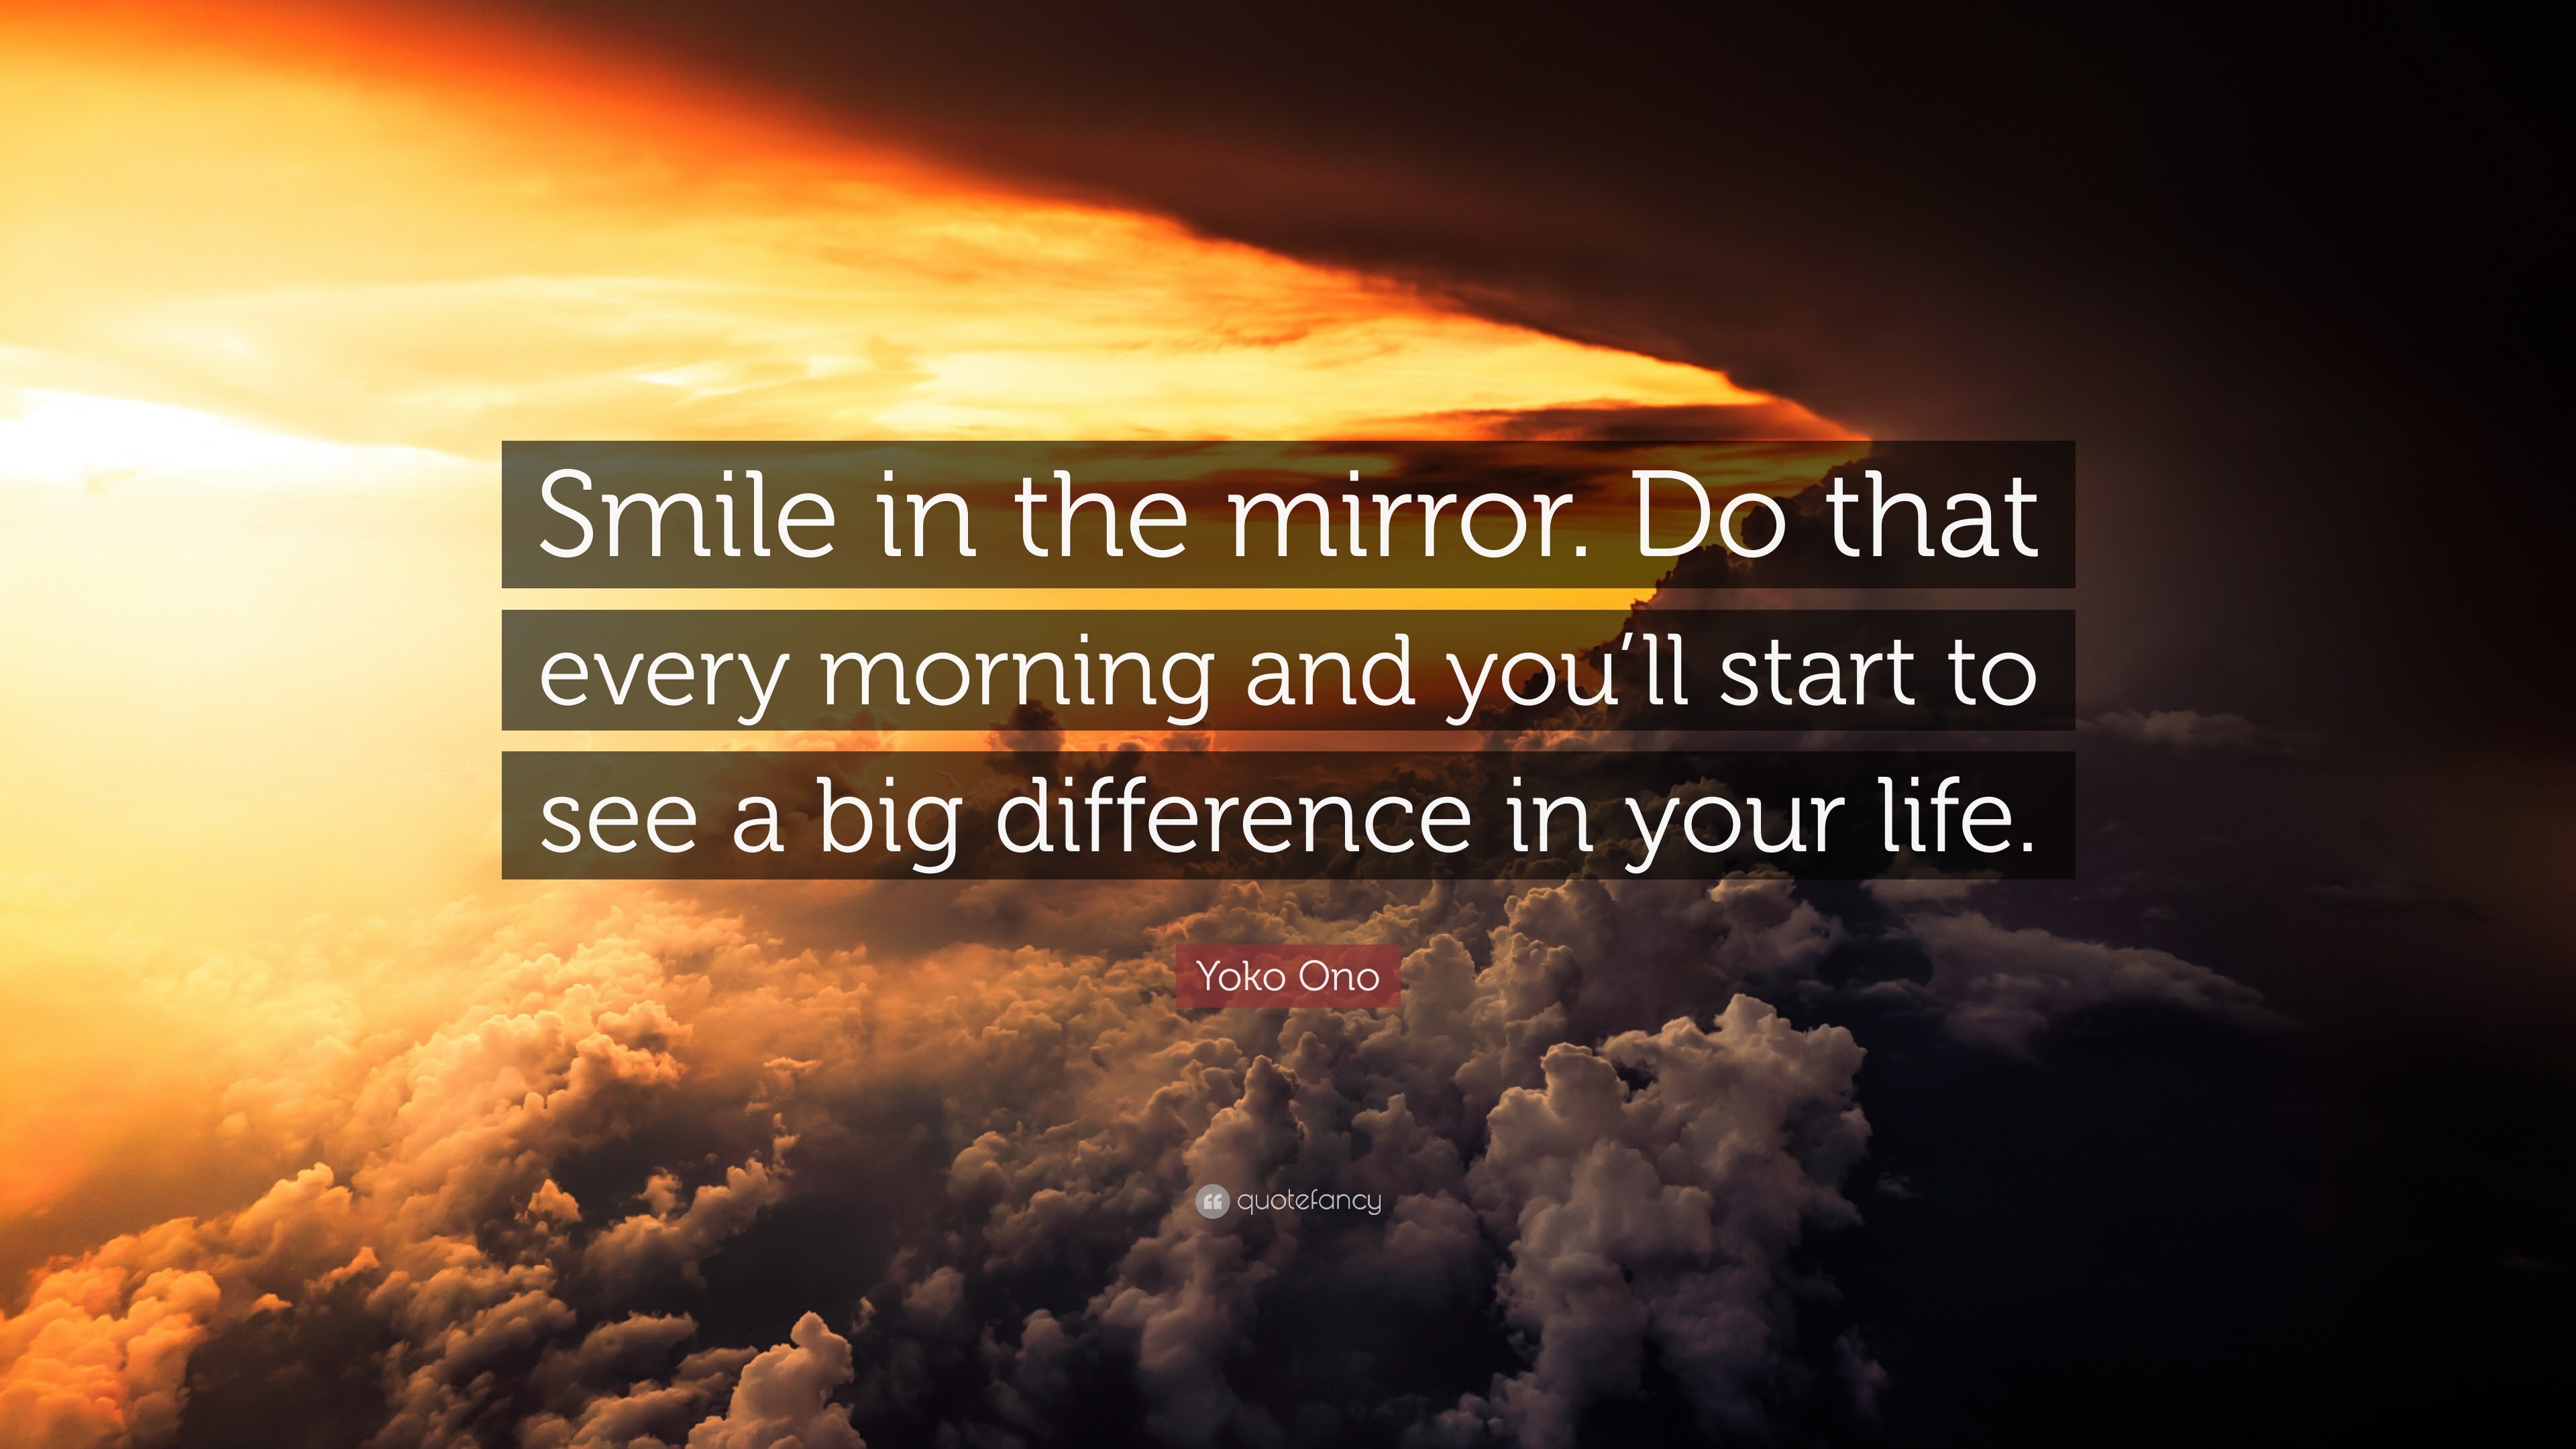 Yoko Ono Quote: “Smile in the mirror. Do that every morning and you’ll ...